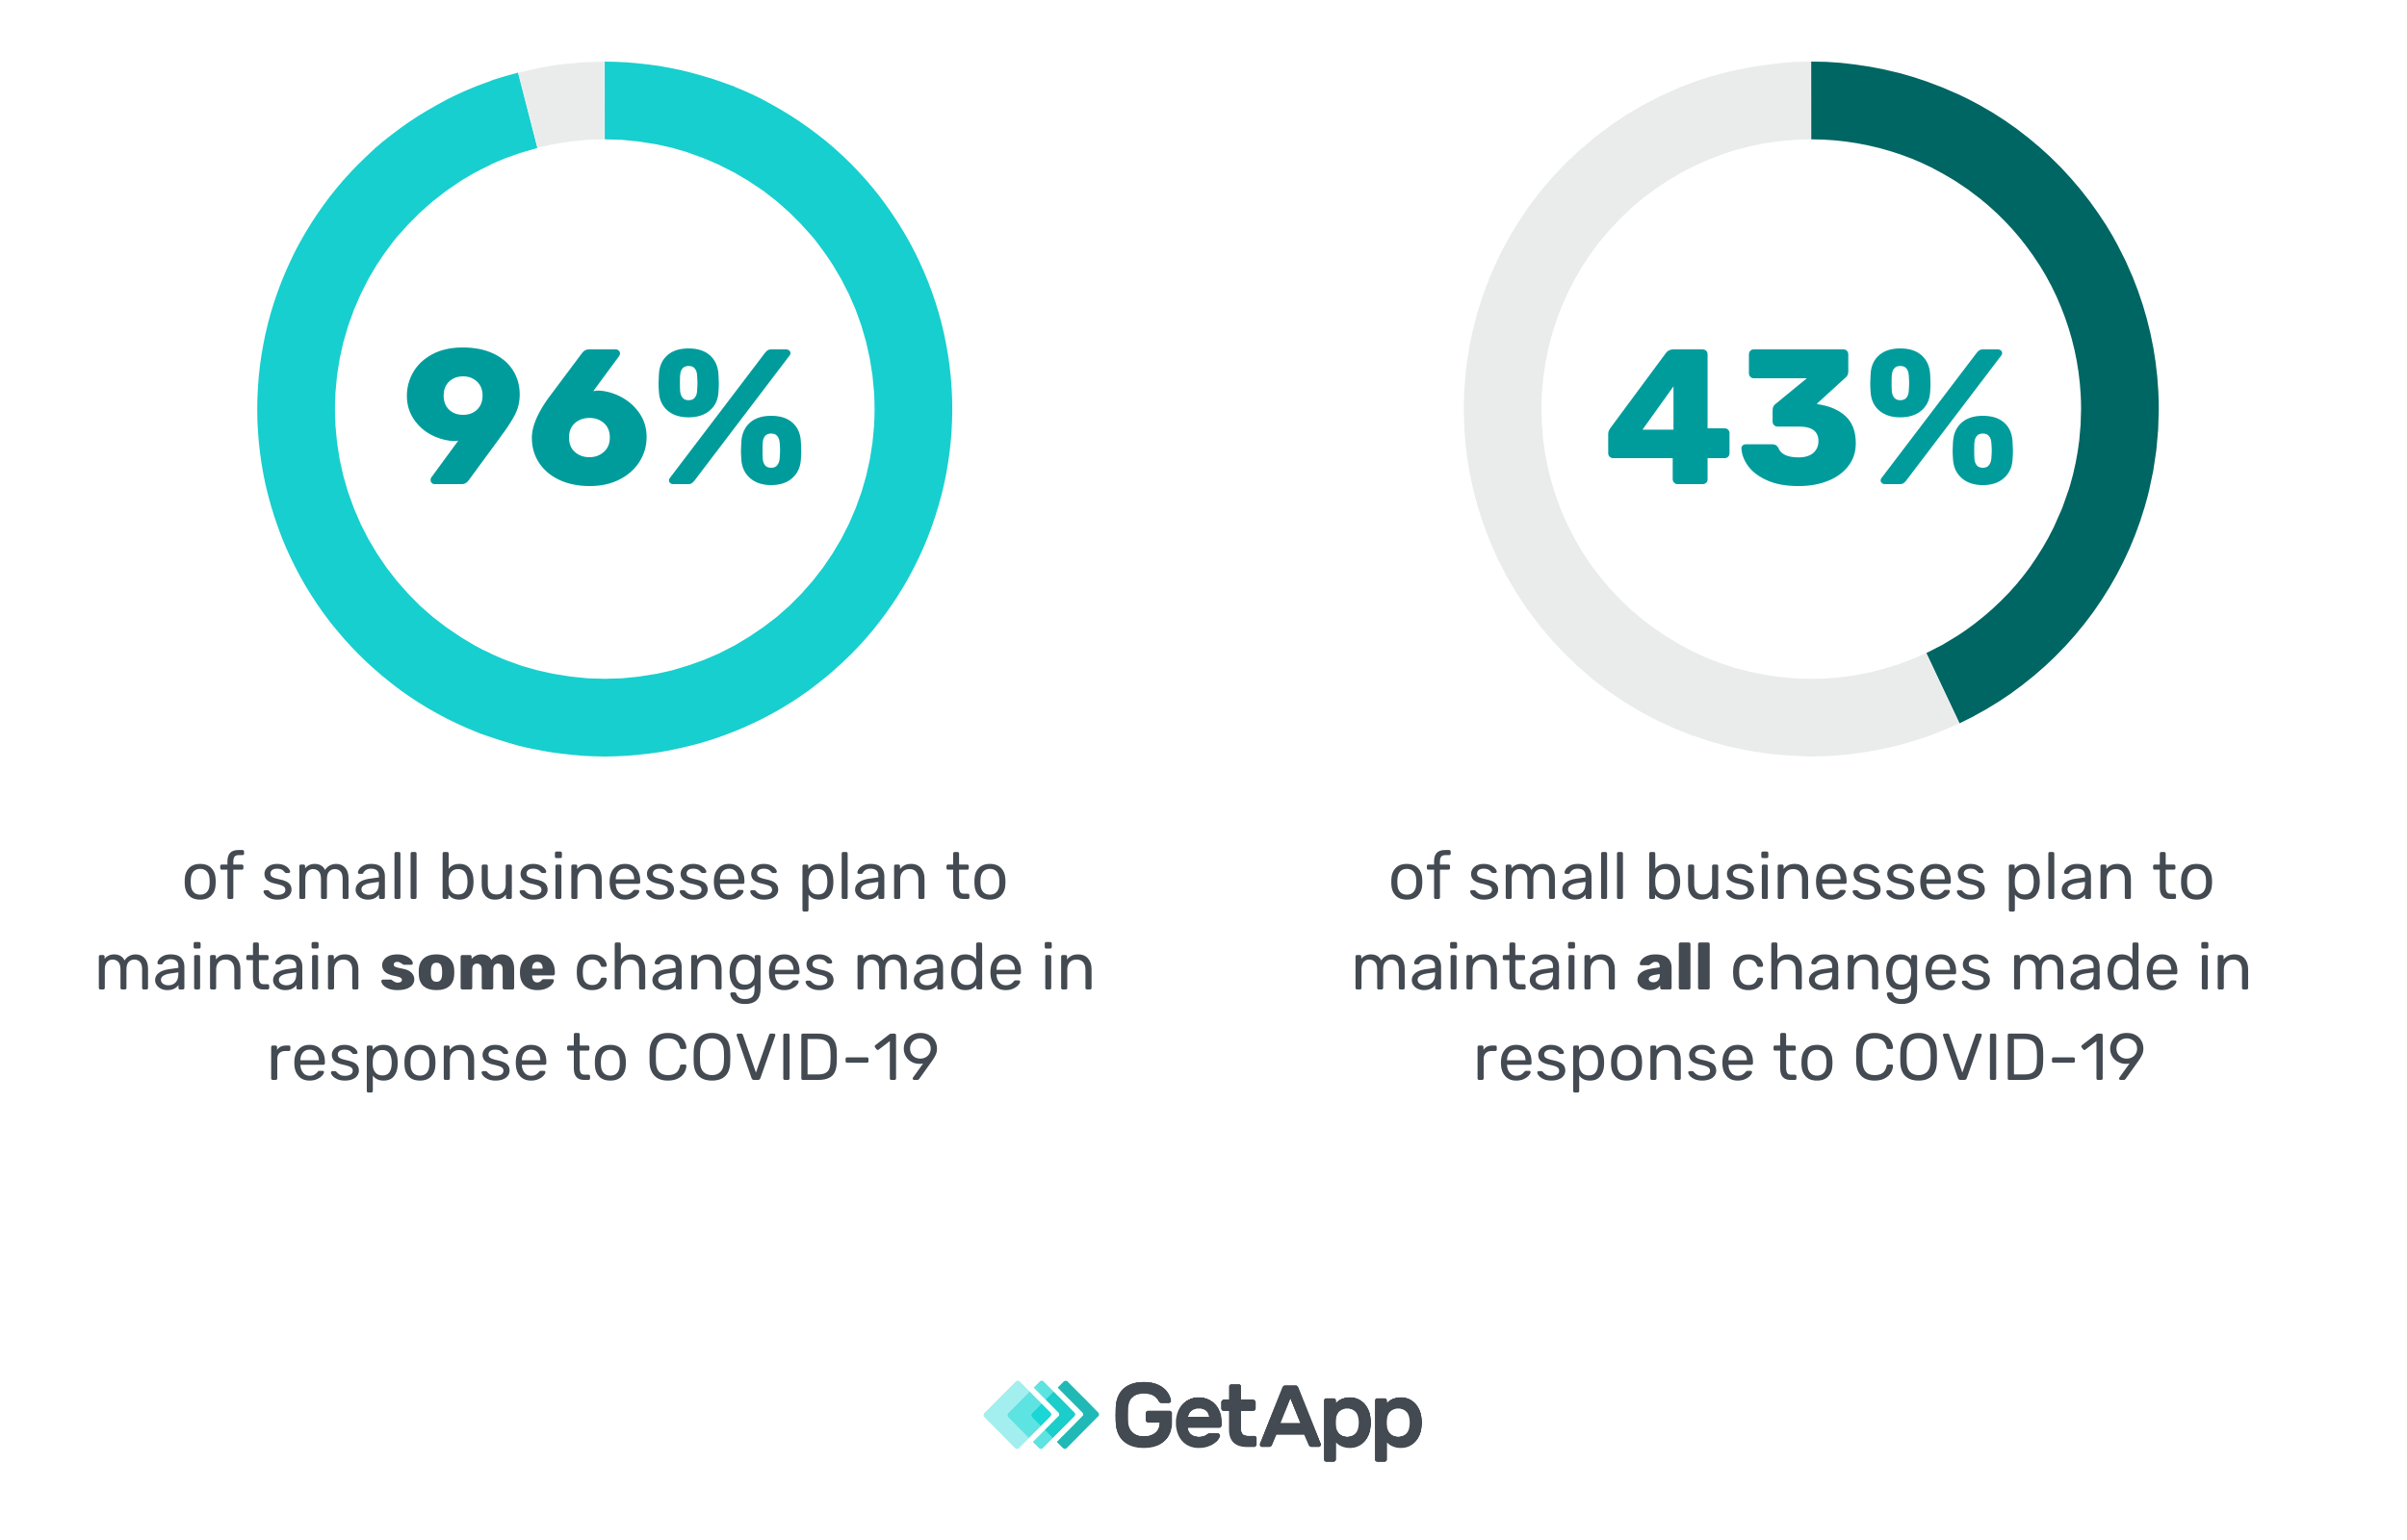 96-percent-of-small-businesses-plan-to-maintain-some-changes